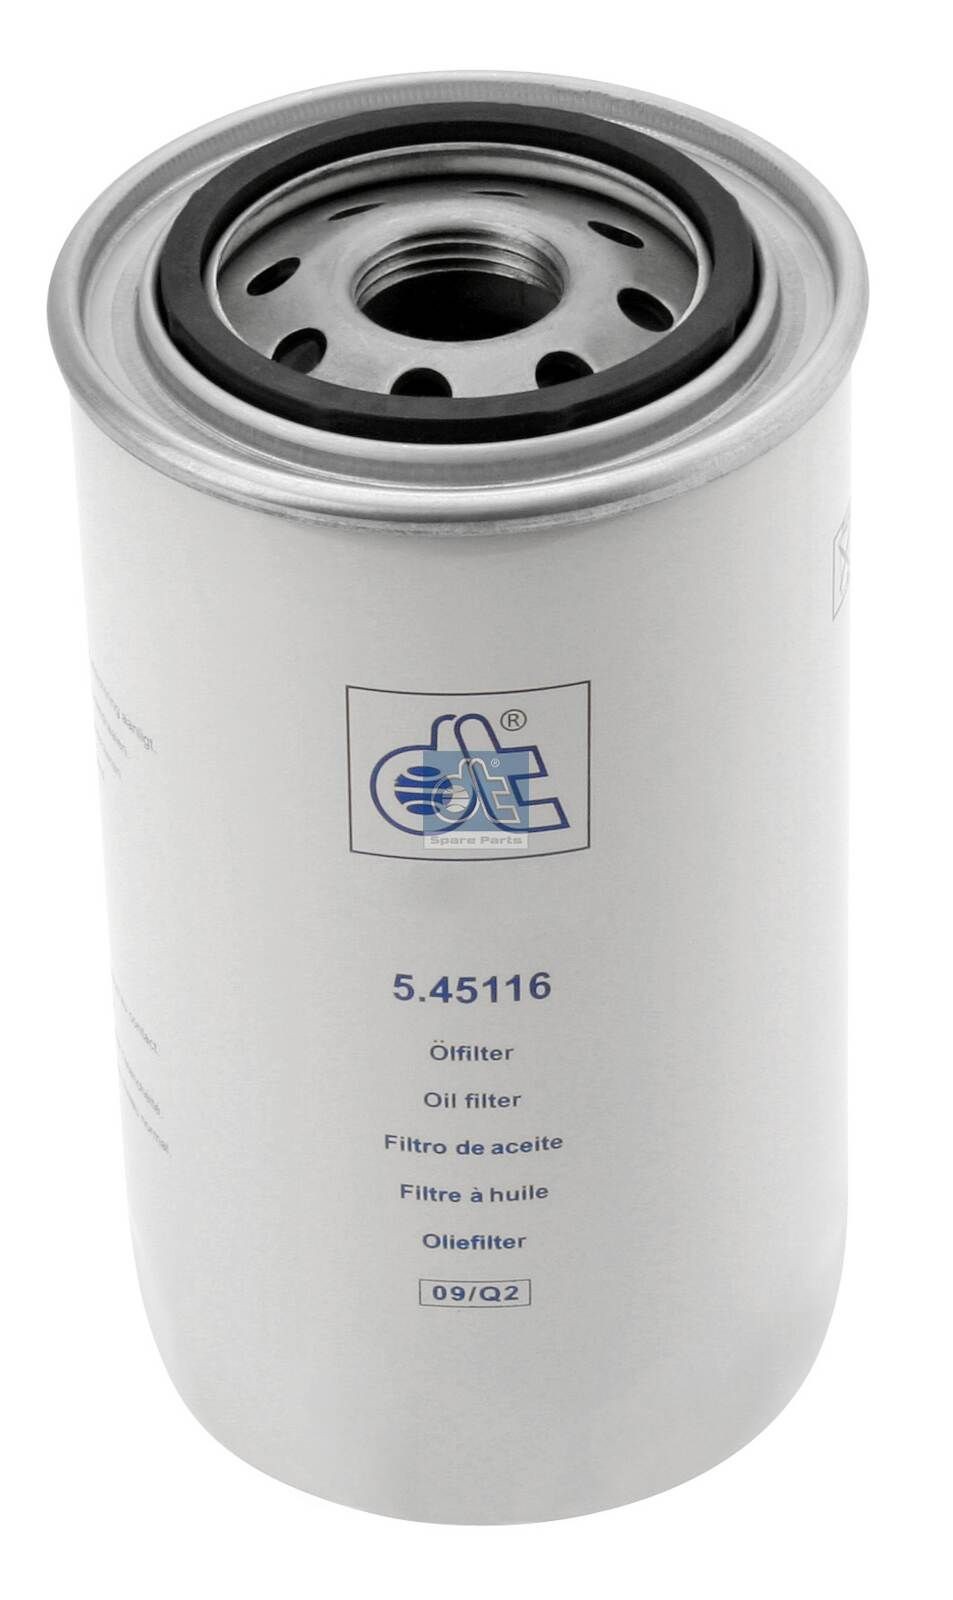 H19W10 DT Spare Parts 5.45116 Oil filter 299 2242